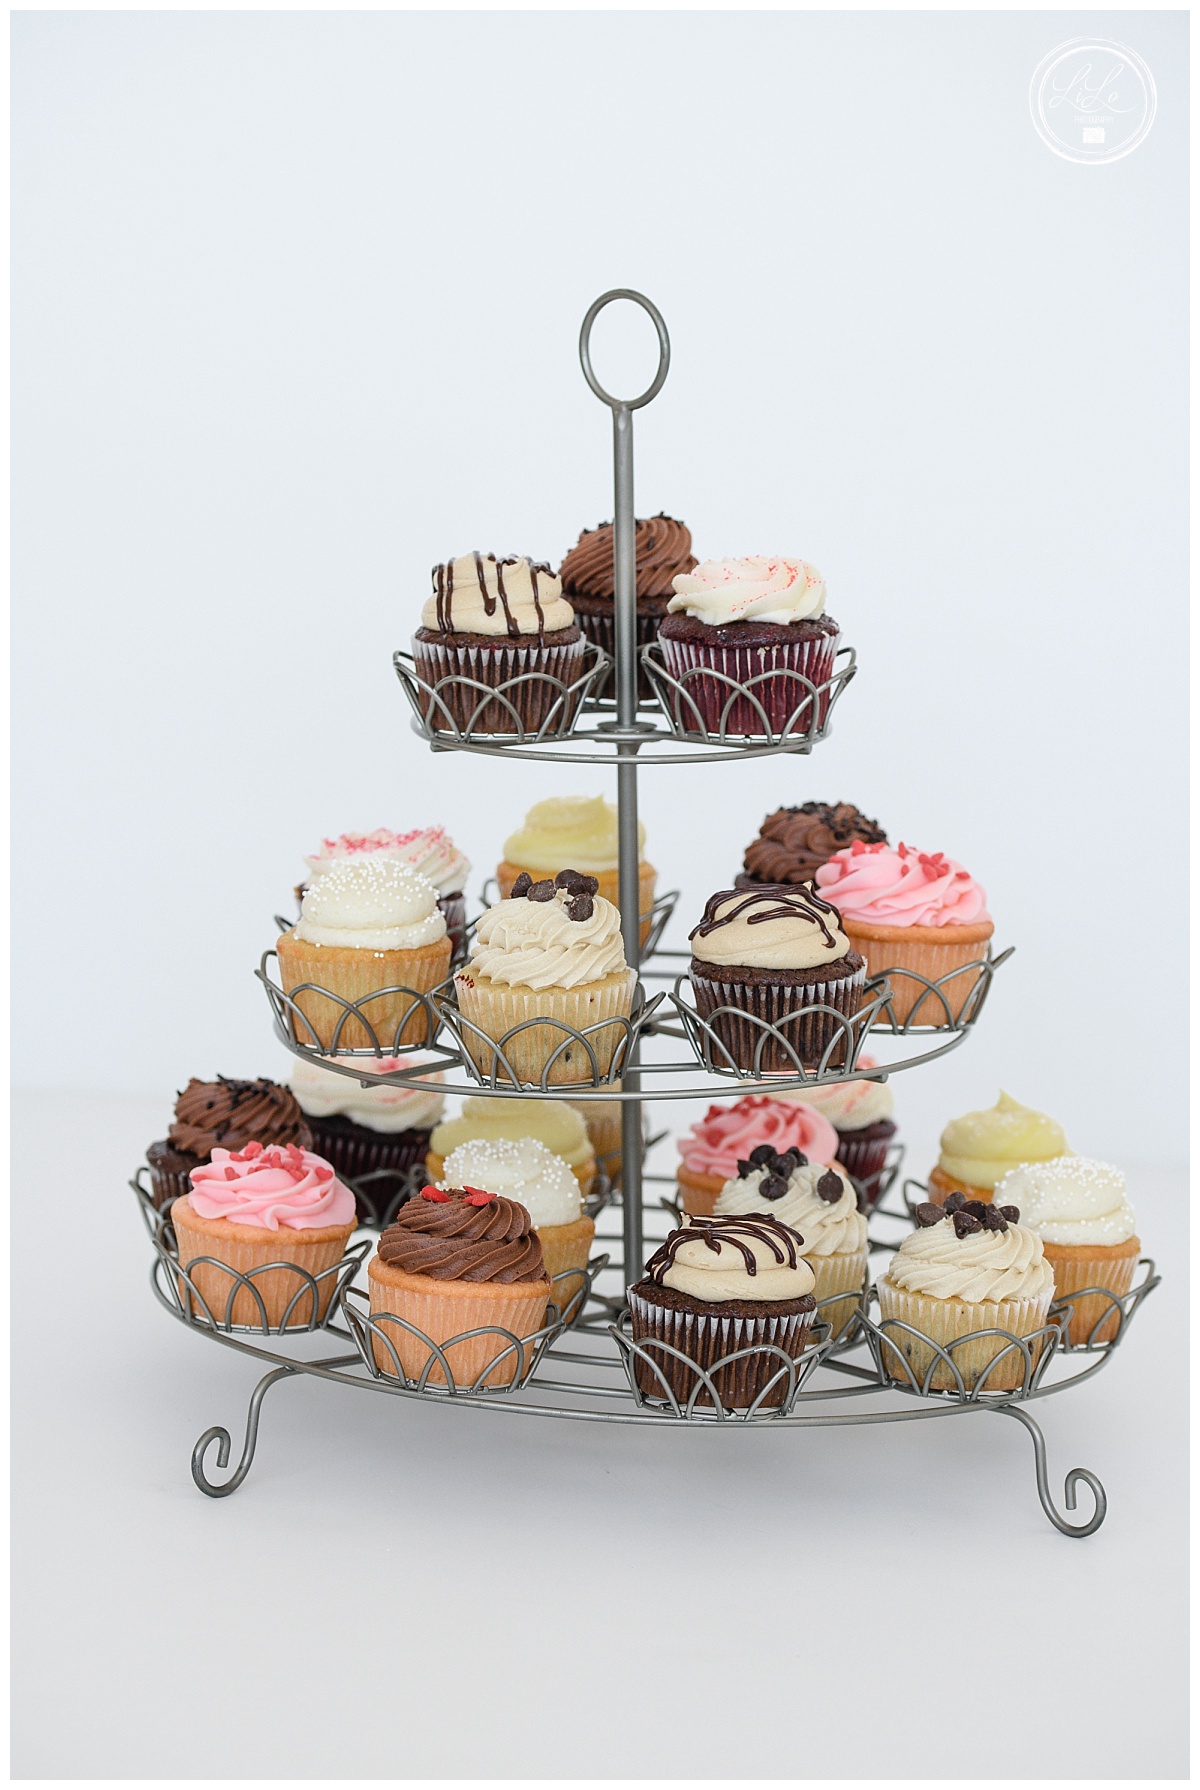 Denver Product Photography for a bunch of baby cupcakes as captured by a Denver branding photographer